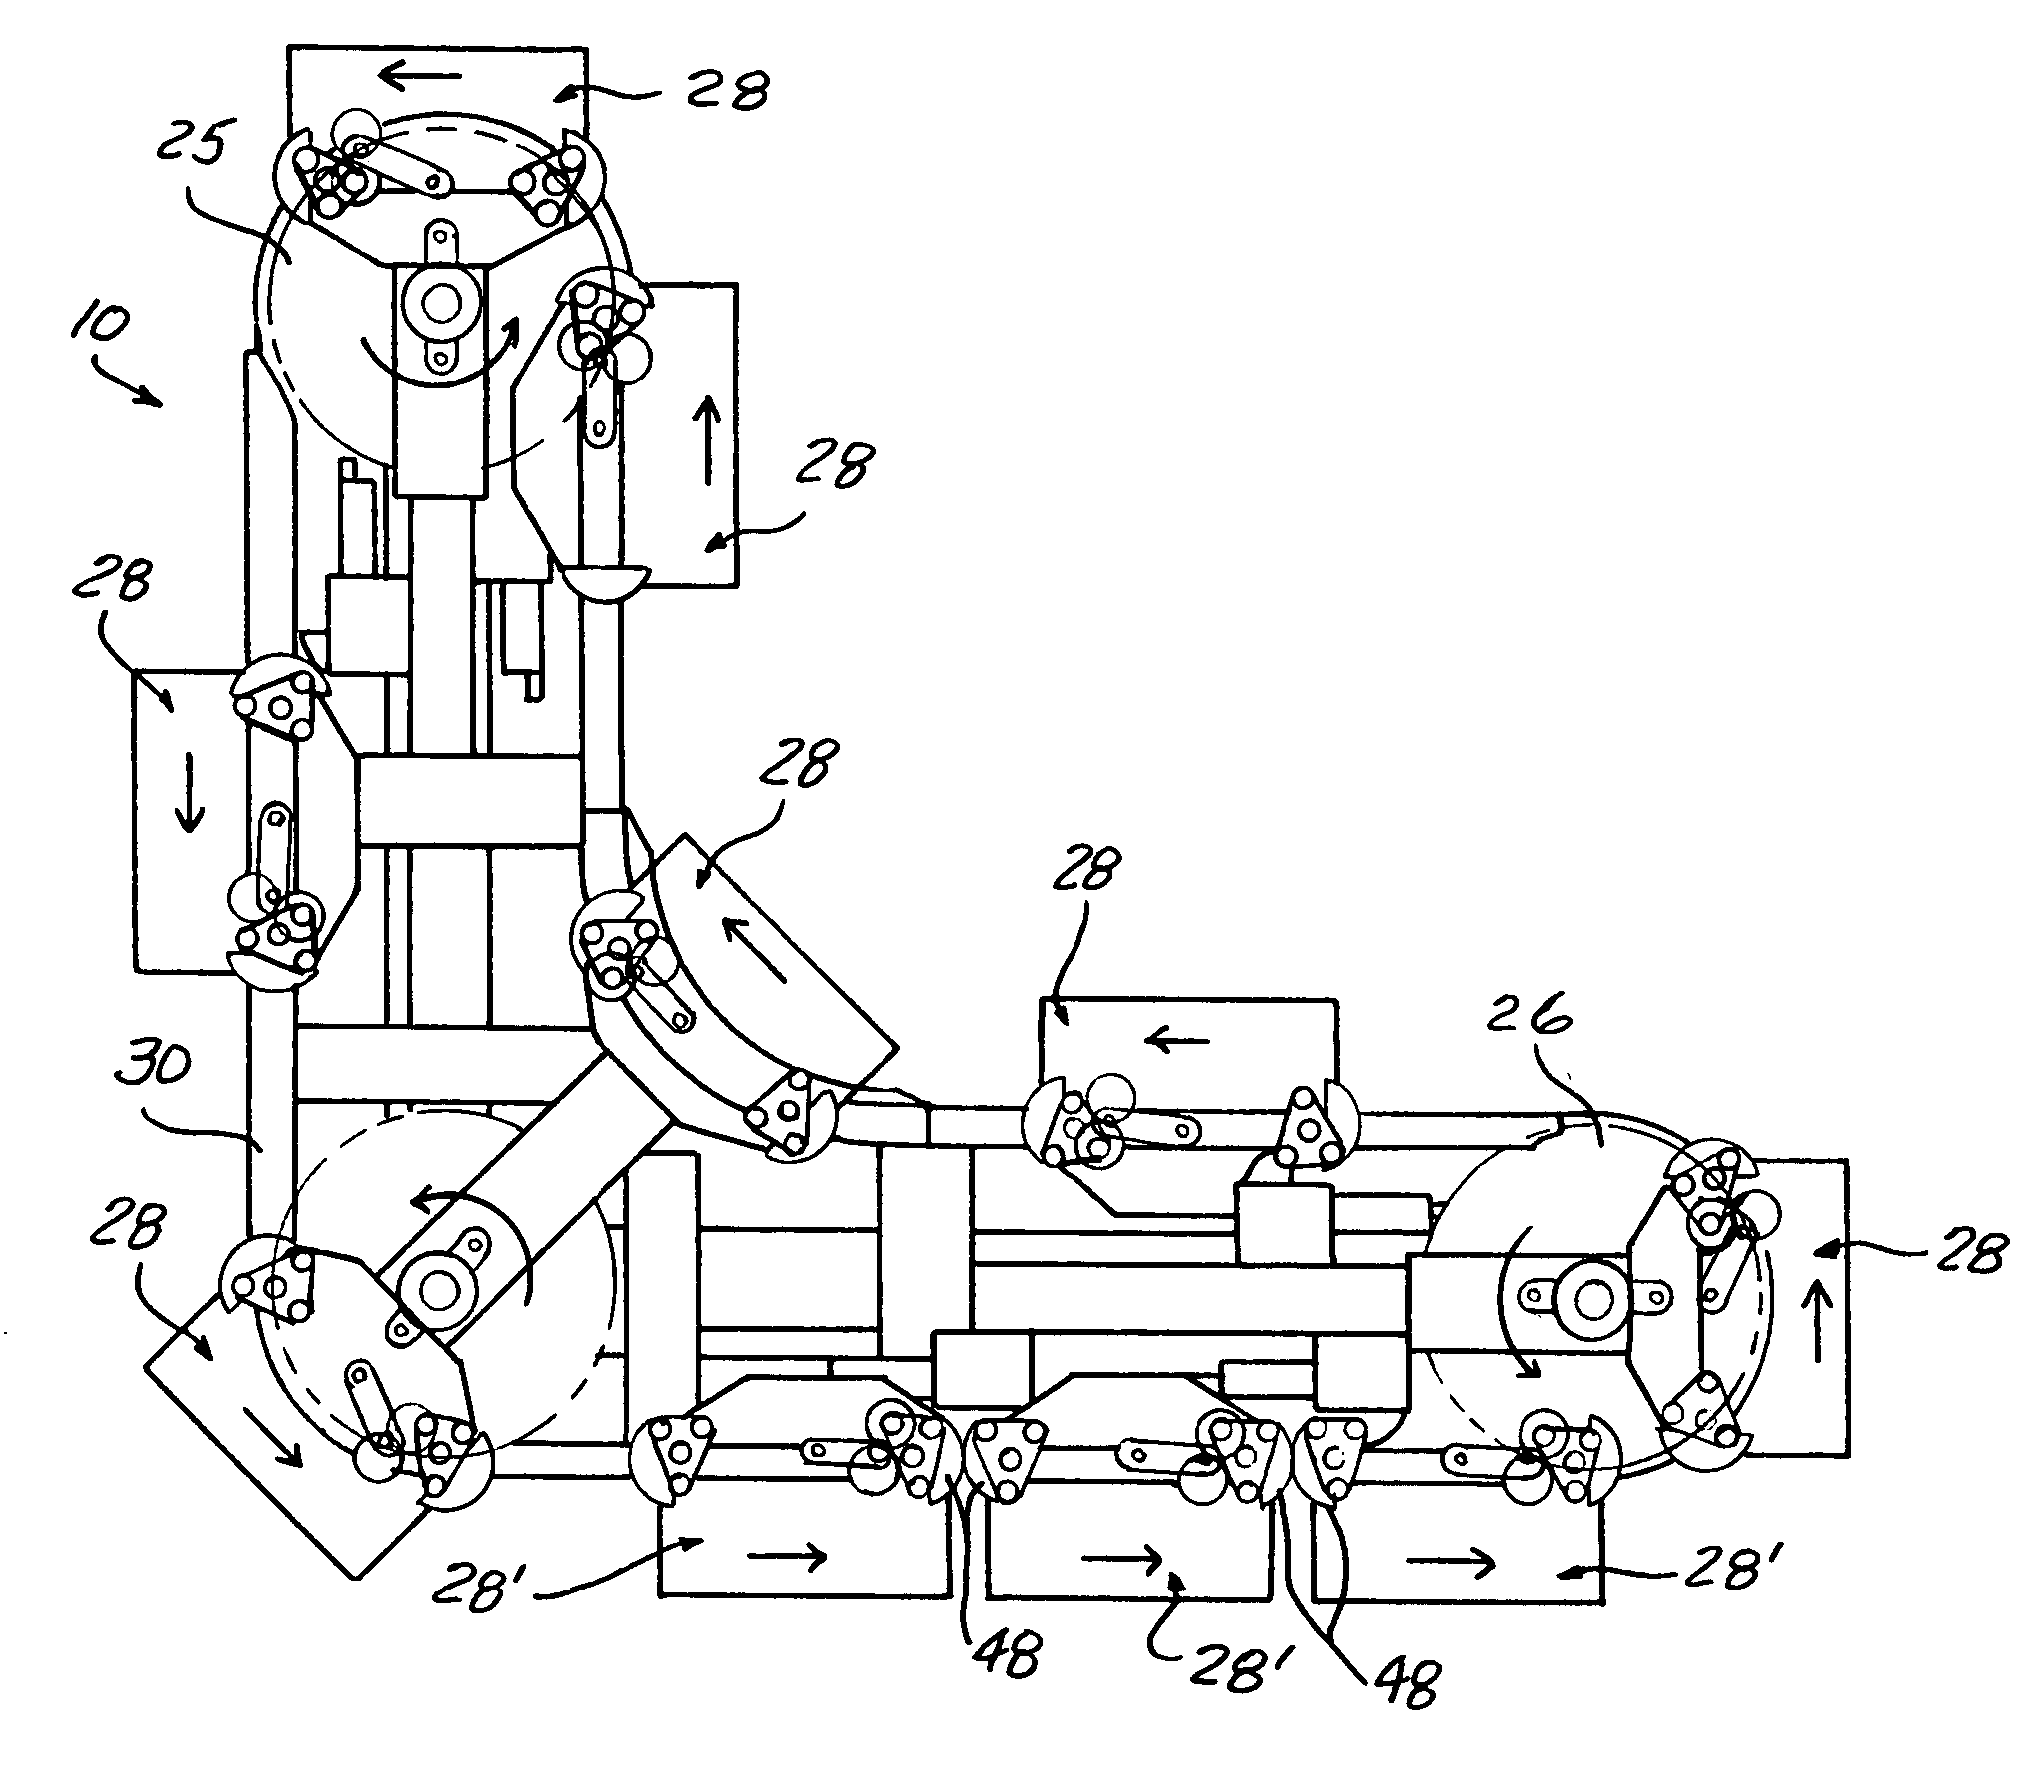 Pallet conveyor with chain drive recirculating in a horizontal plane